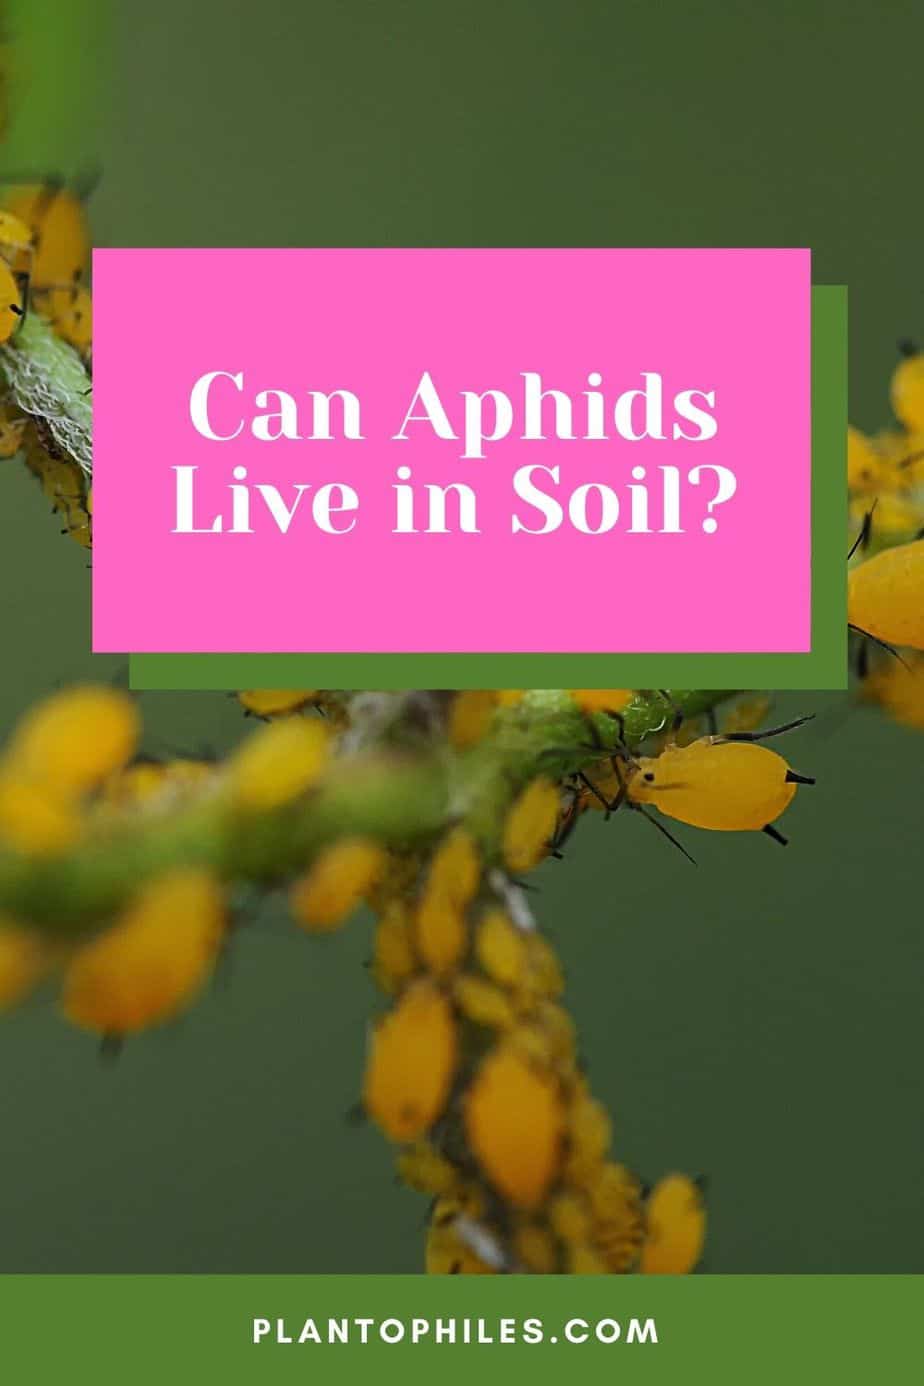 Can Aphids Live in Soil?